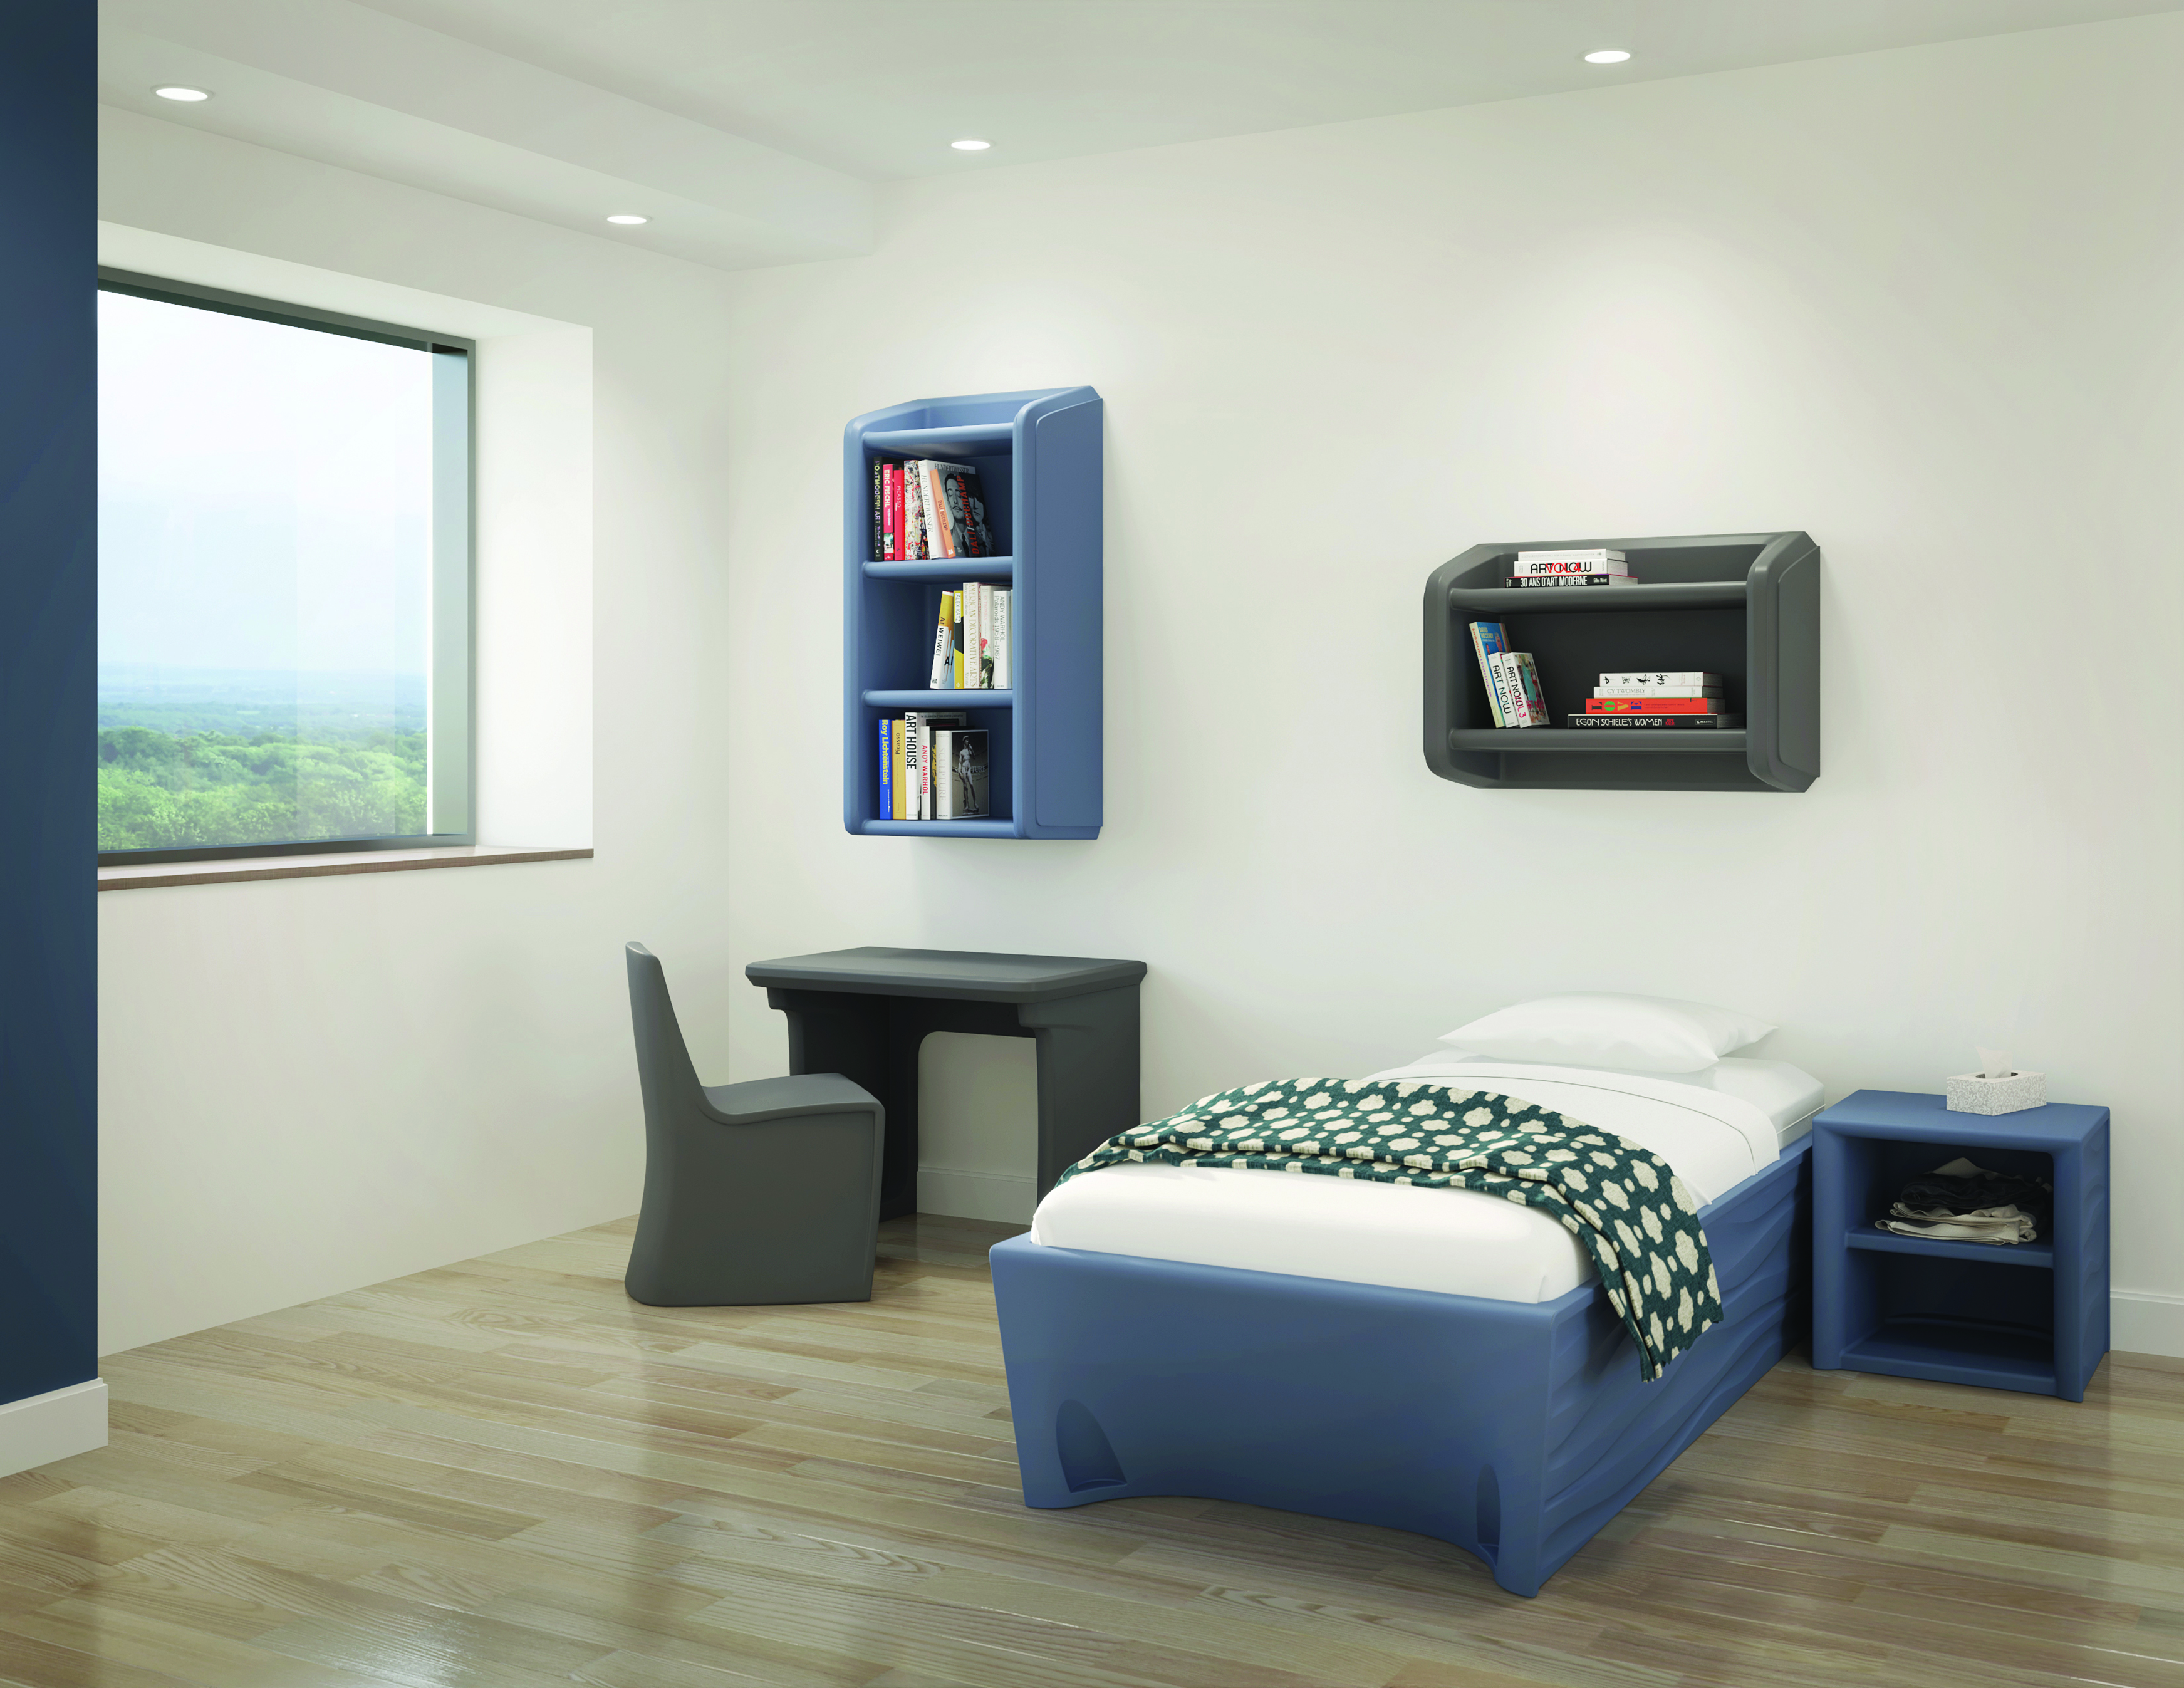 blue and dark grey rotomolded furniture in a patient room. includes desk, club style chair, bed, bedside table, and two sets of shelves